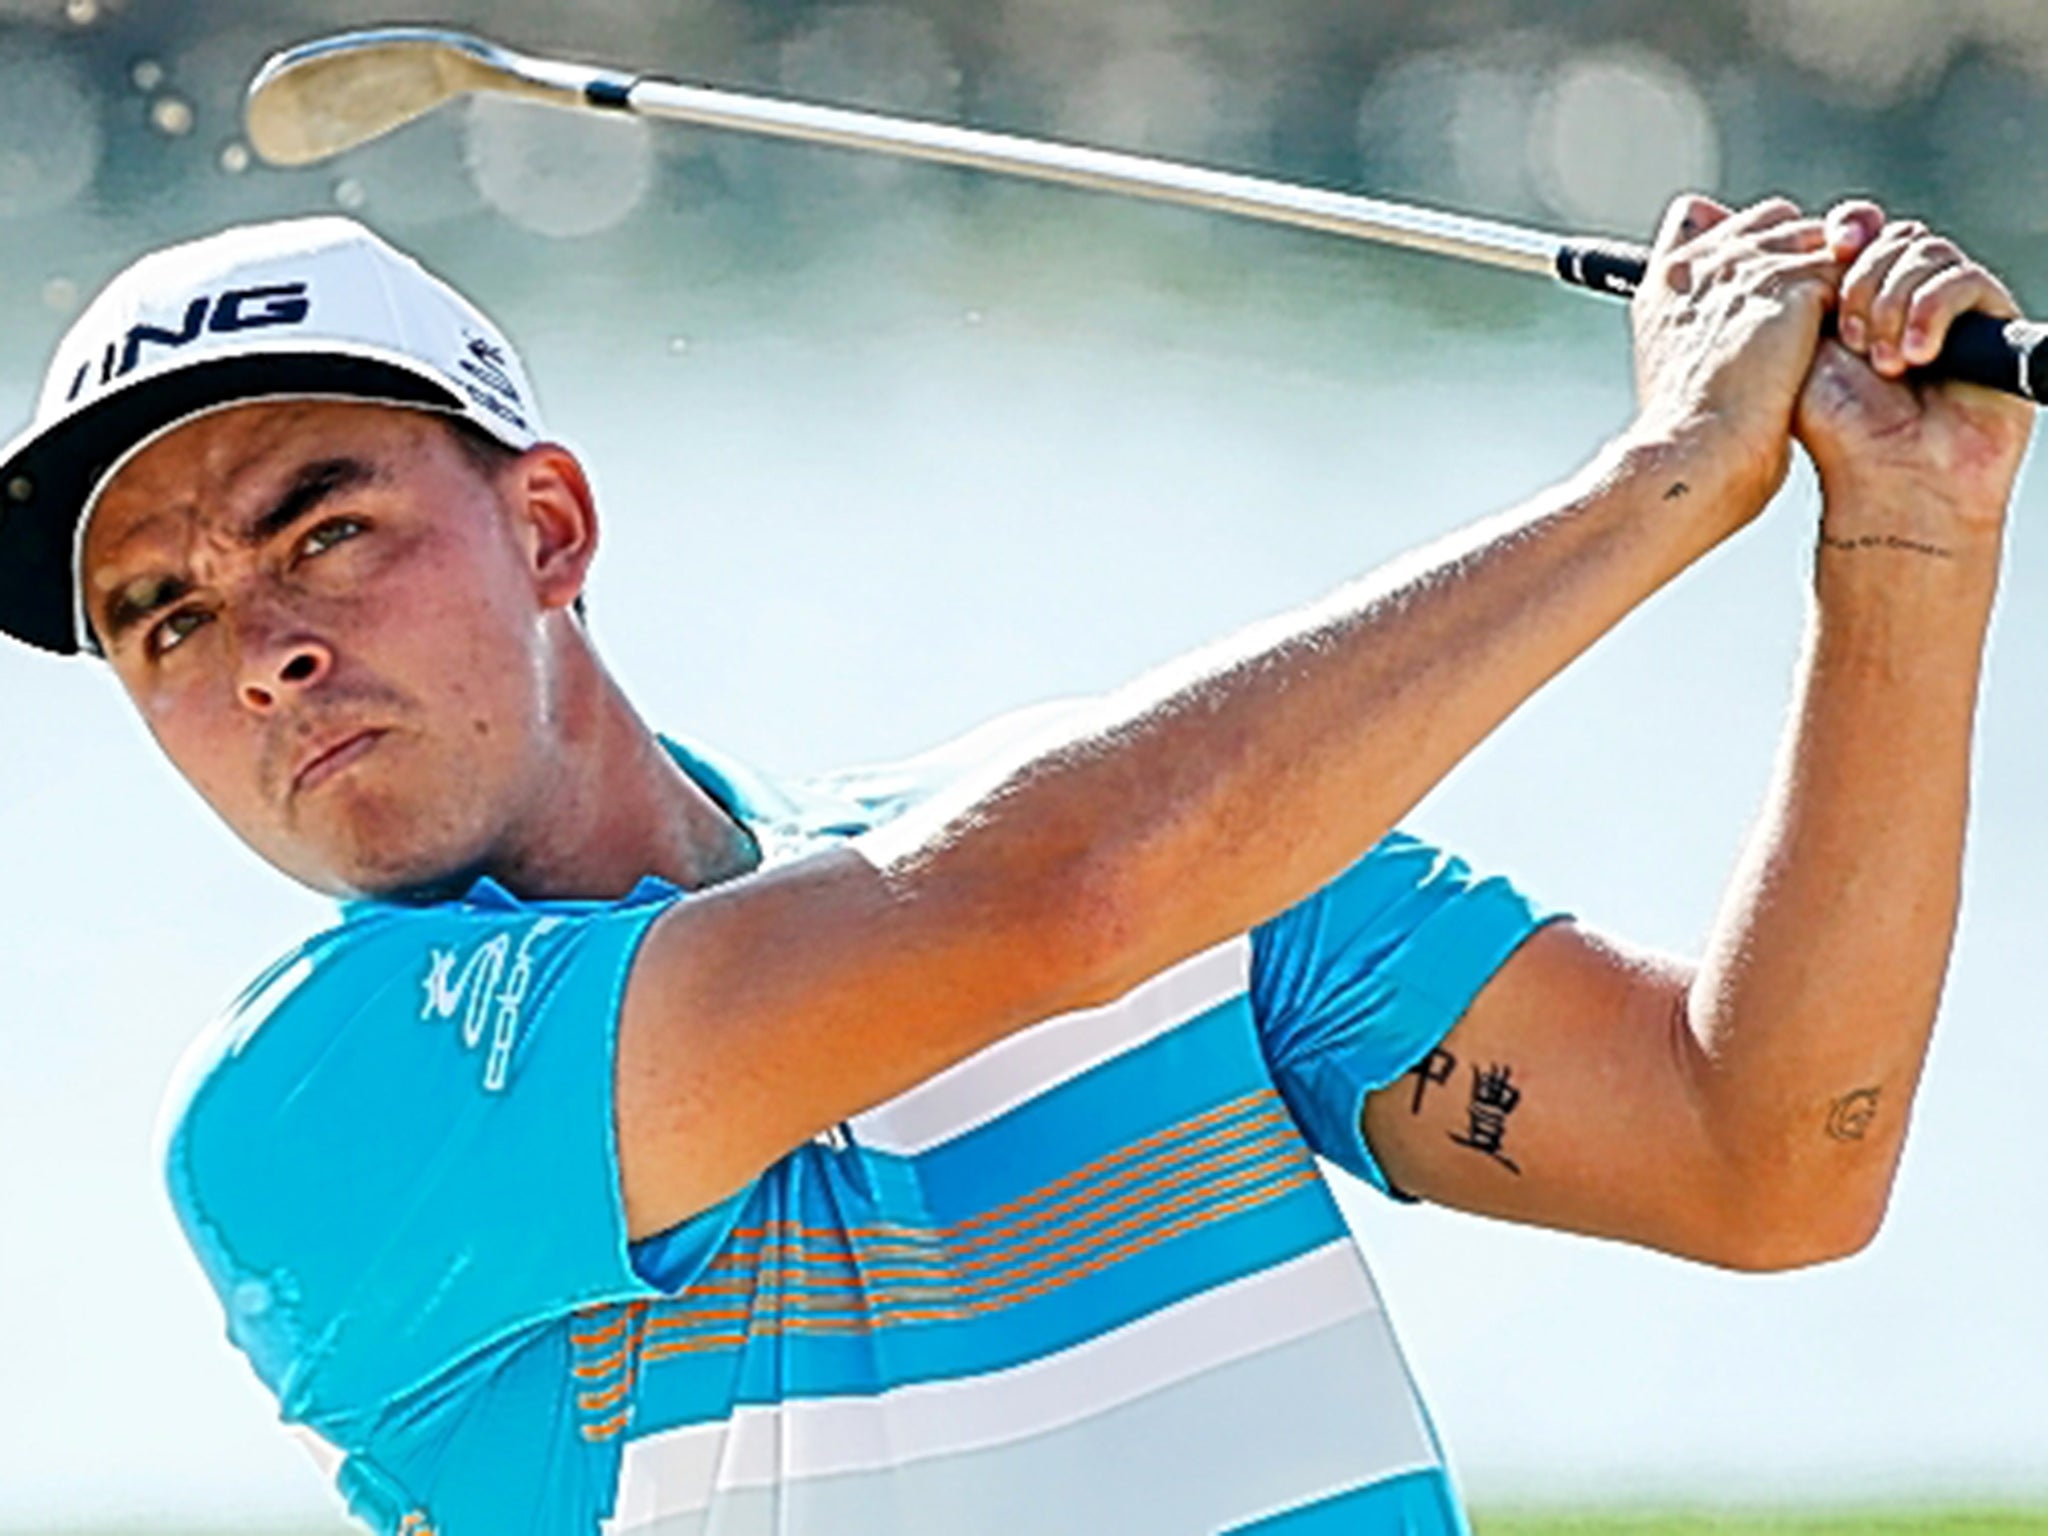 Rickie Fowler plays a practice round in Abu Dhabi